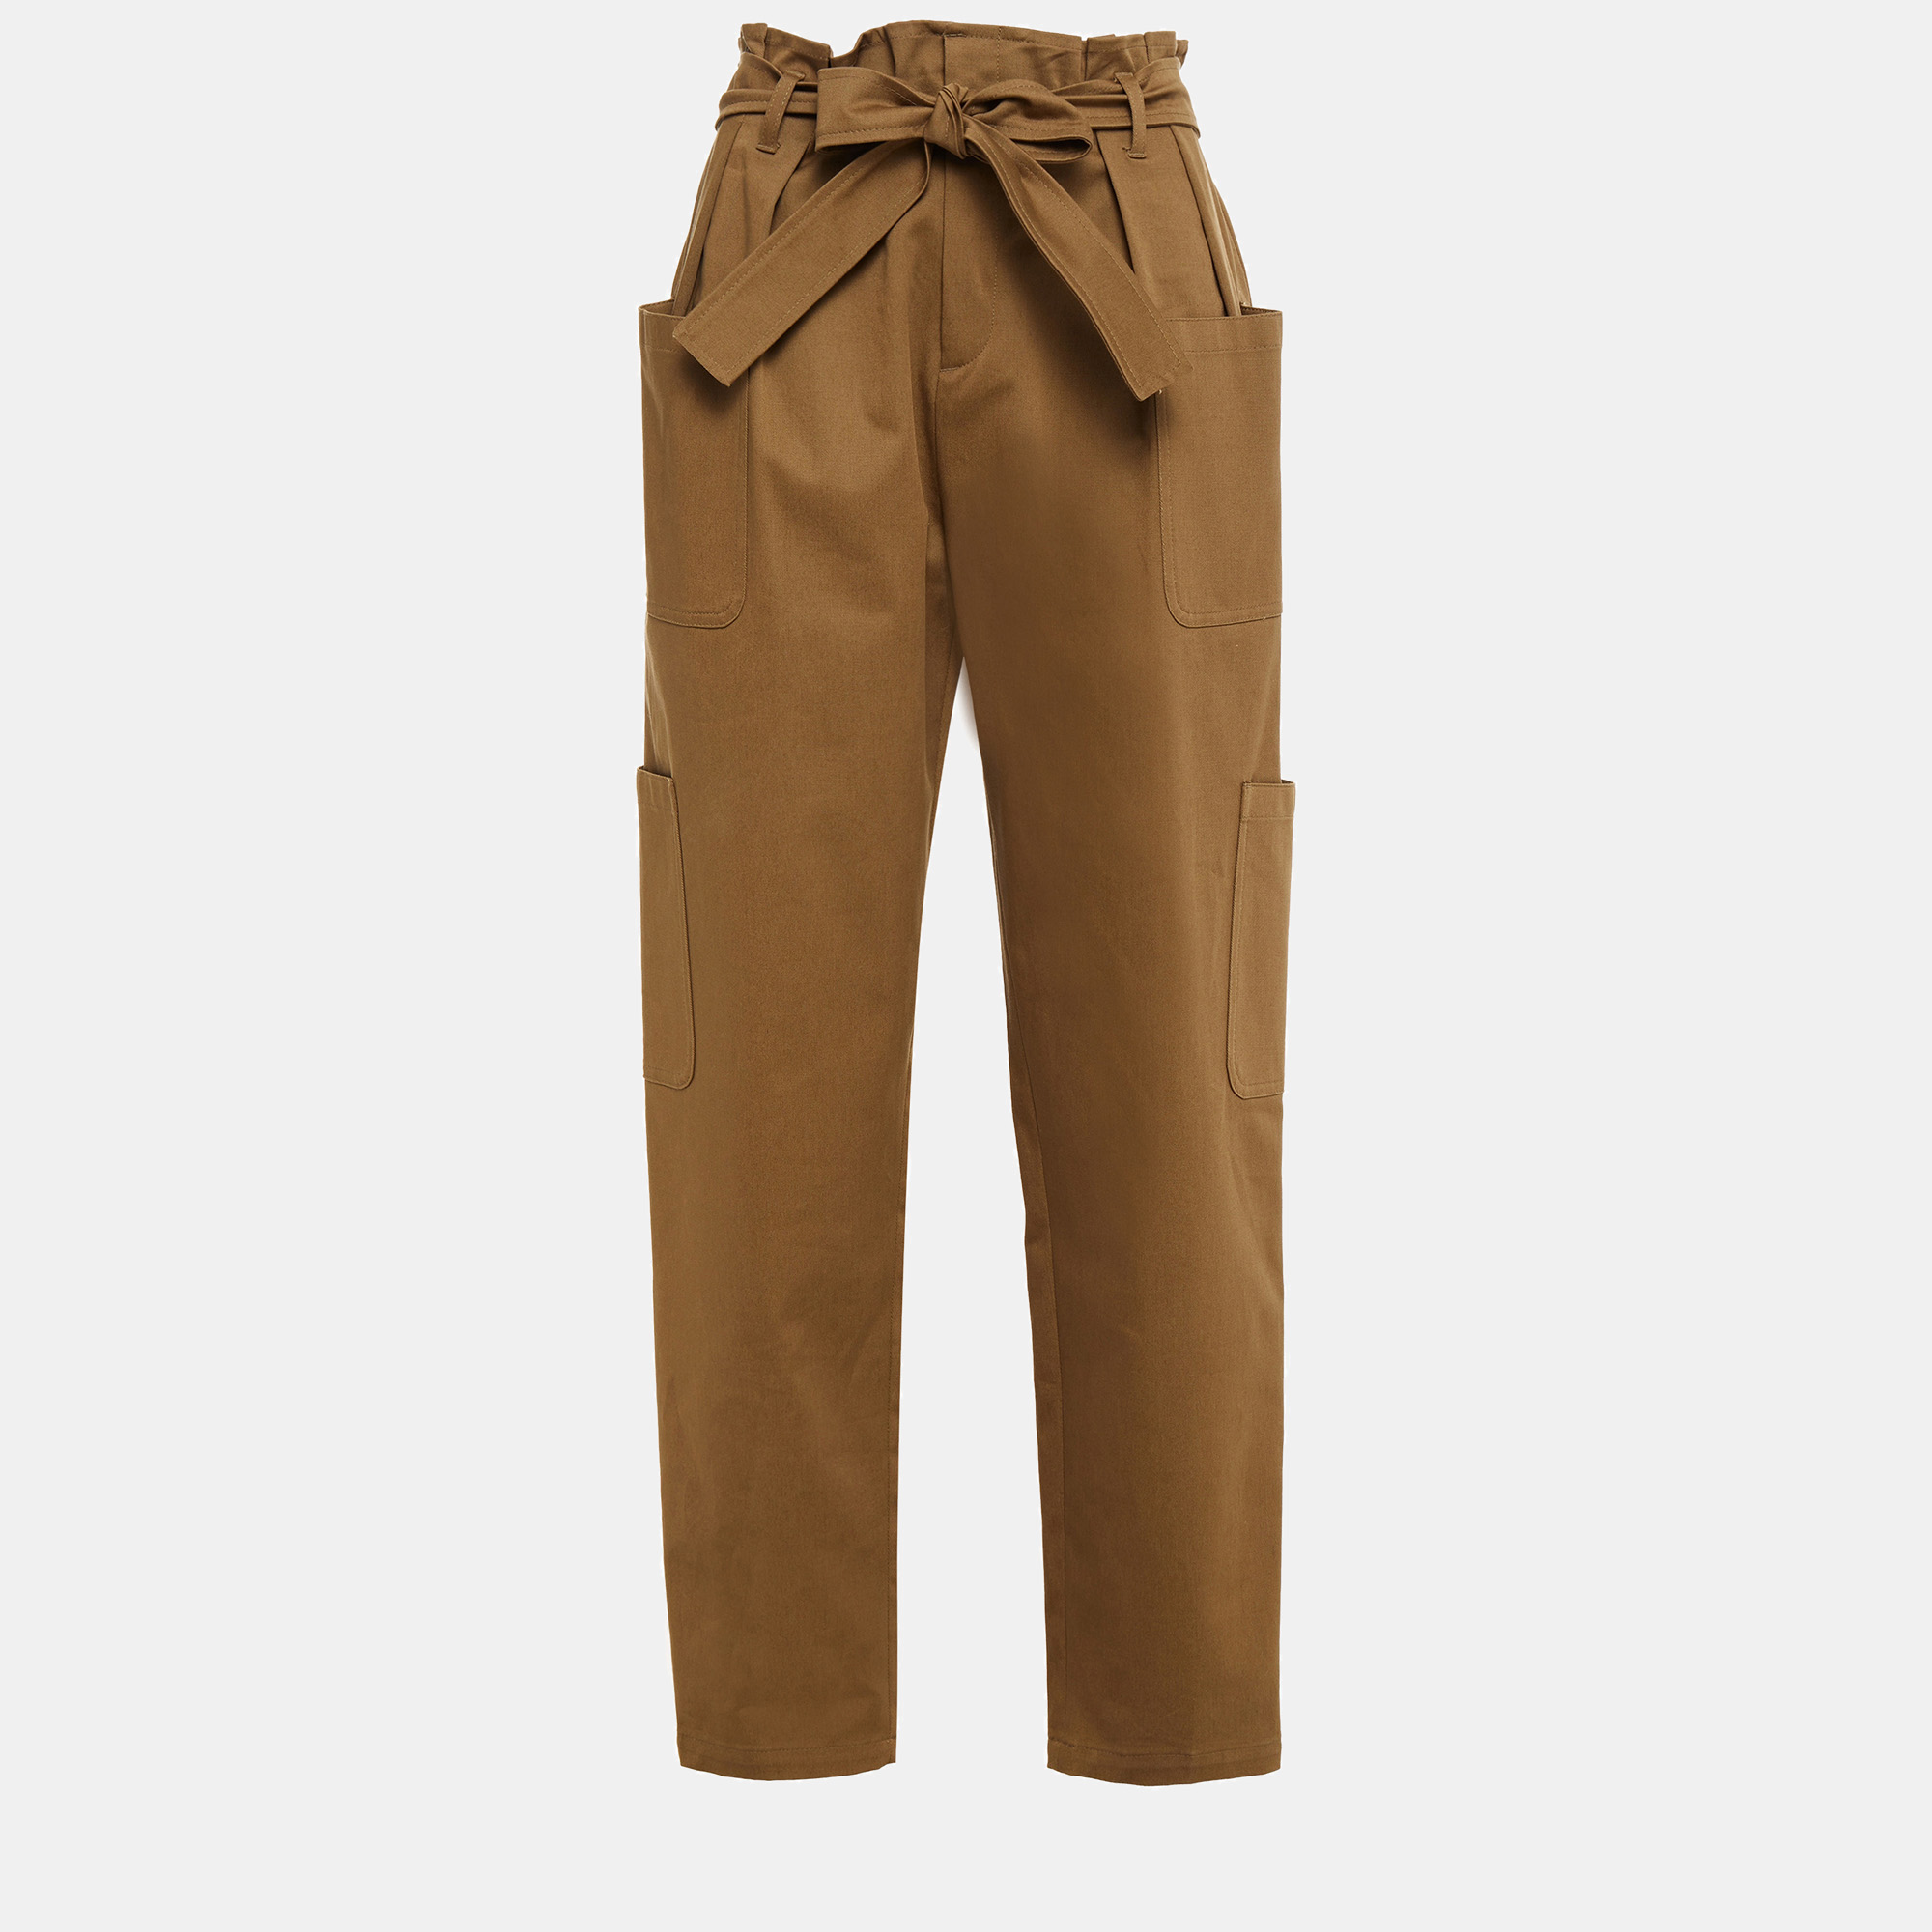 Red valentino brown cotton tapered pants l (it 44)